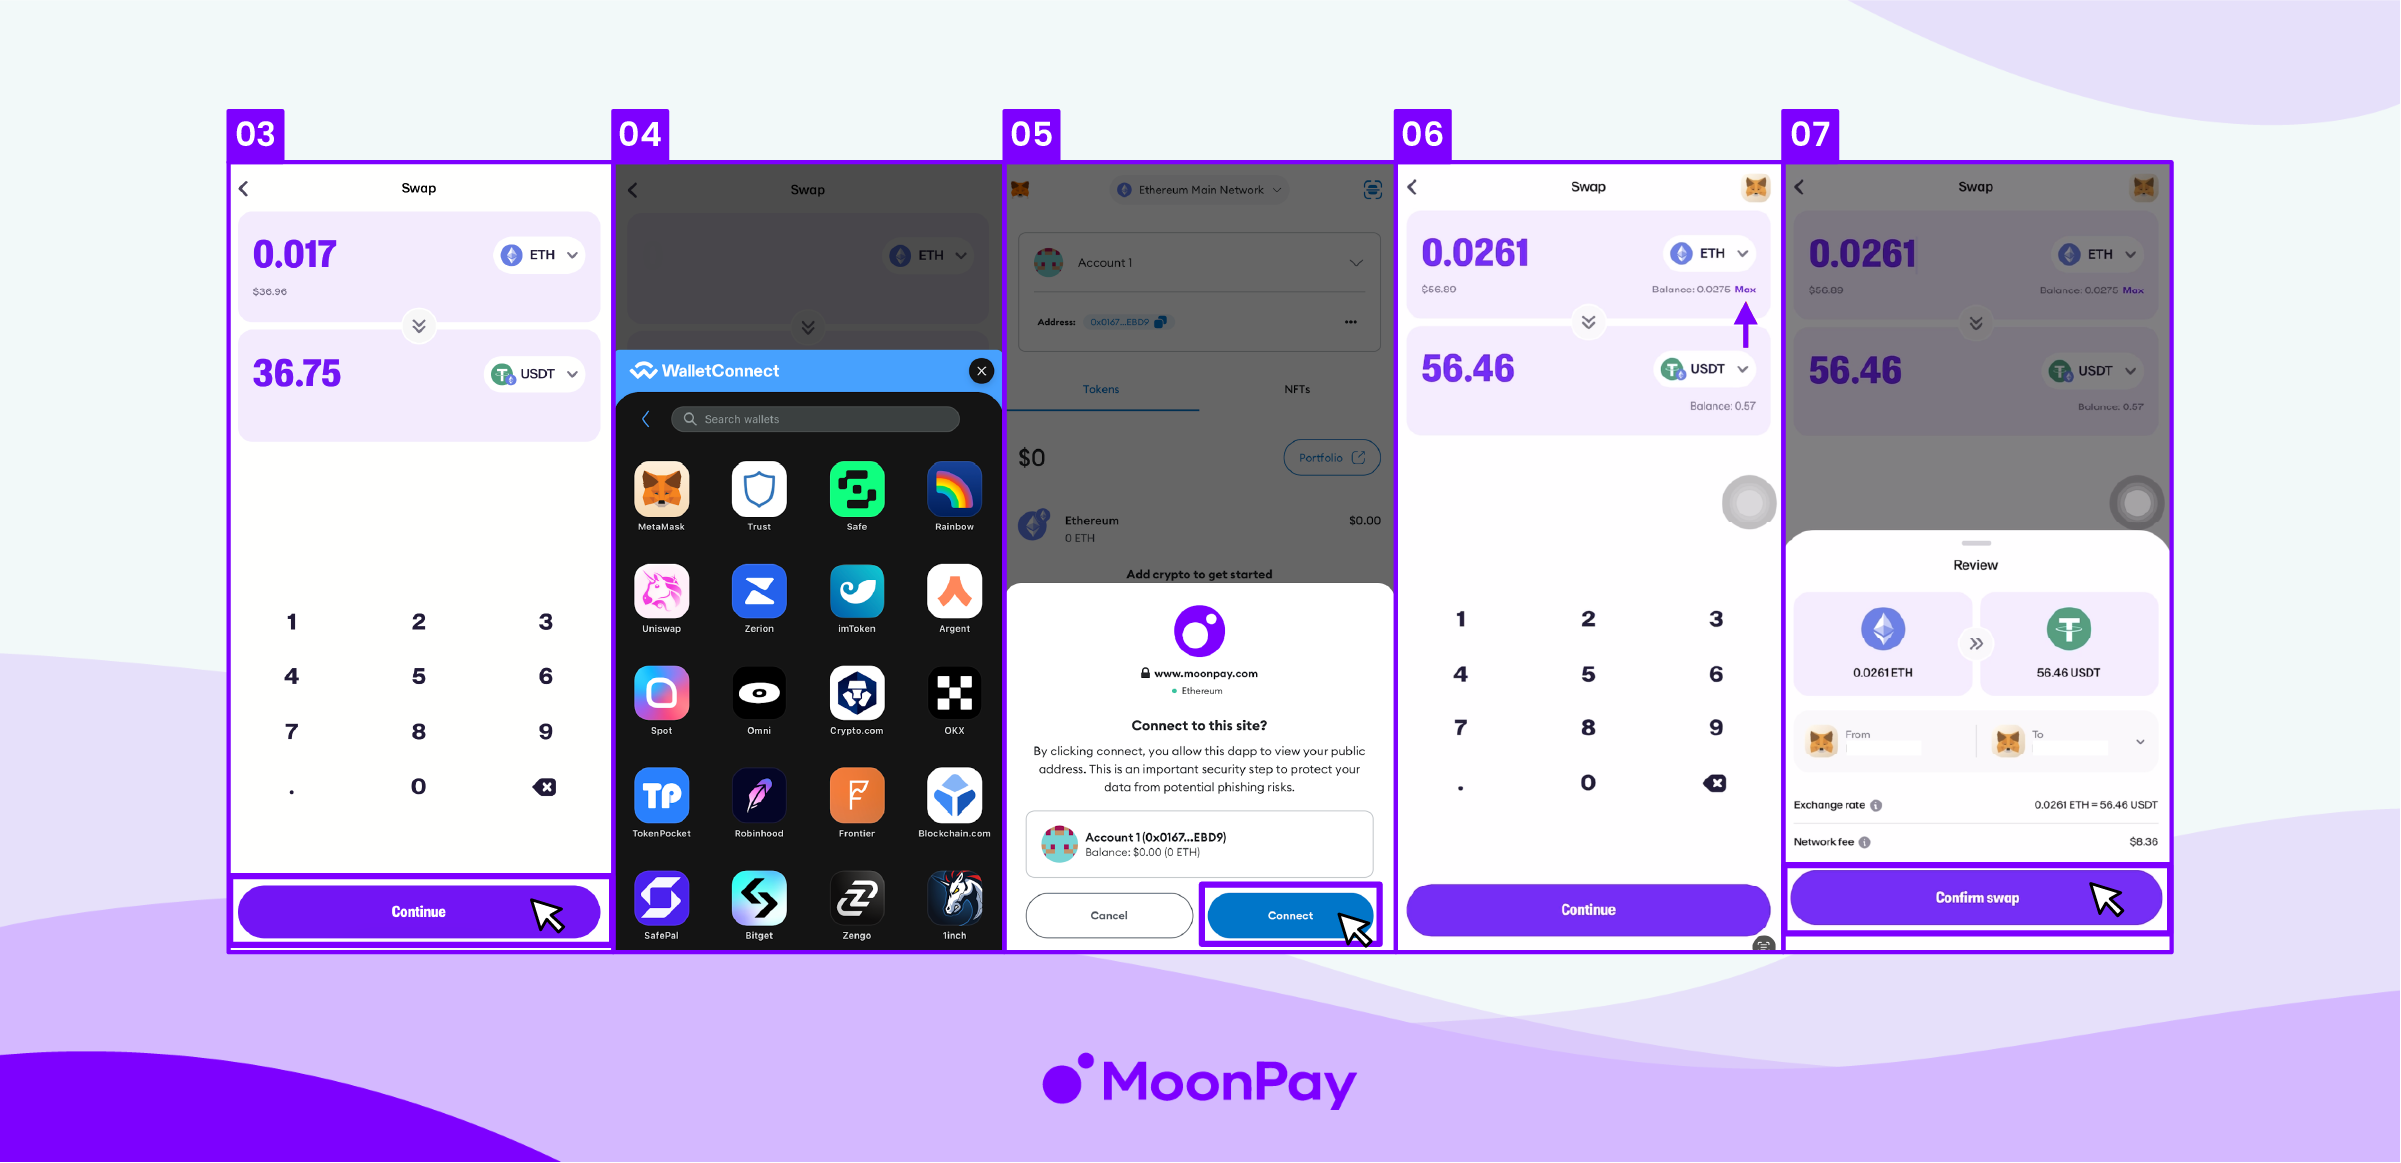 Steps 3-7 button in the MoonPay app on how to swap.